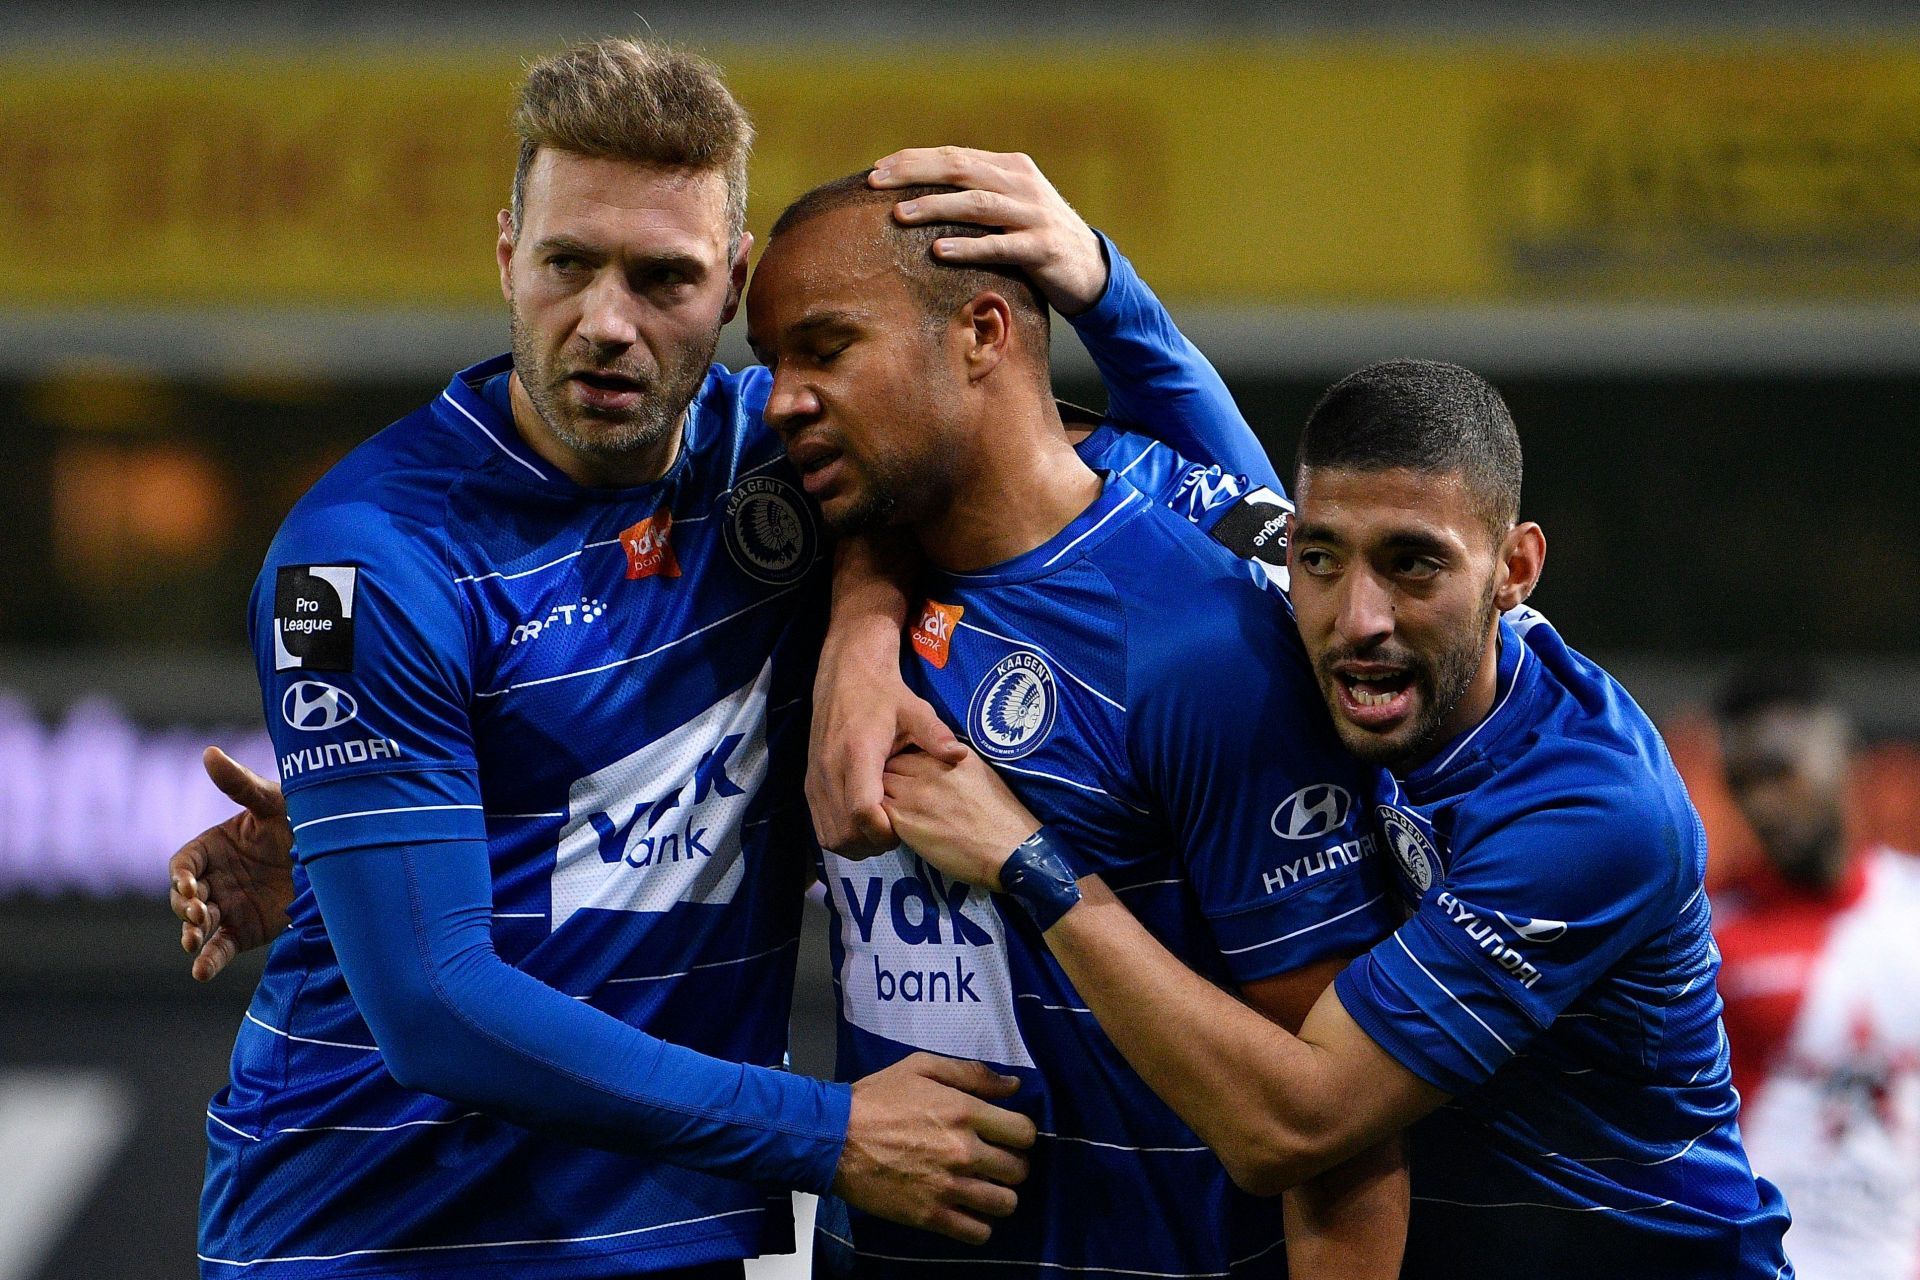 Gent will look to extend their unbeaten run in the Europa Conference League against Anorthosis